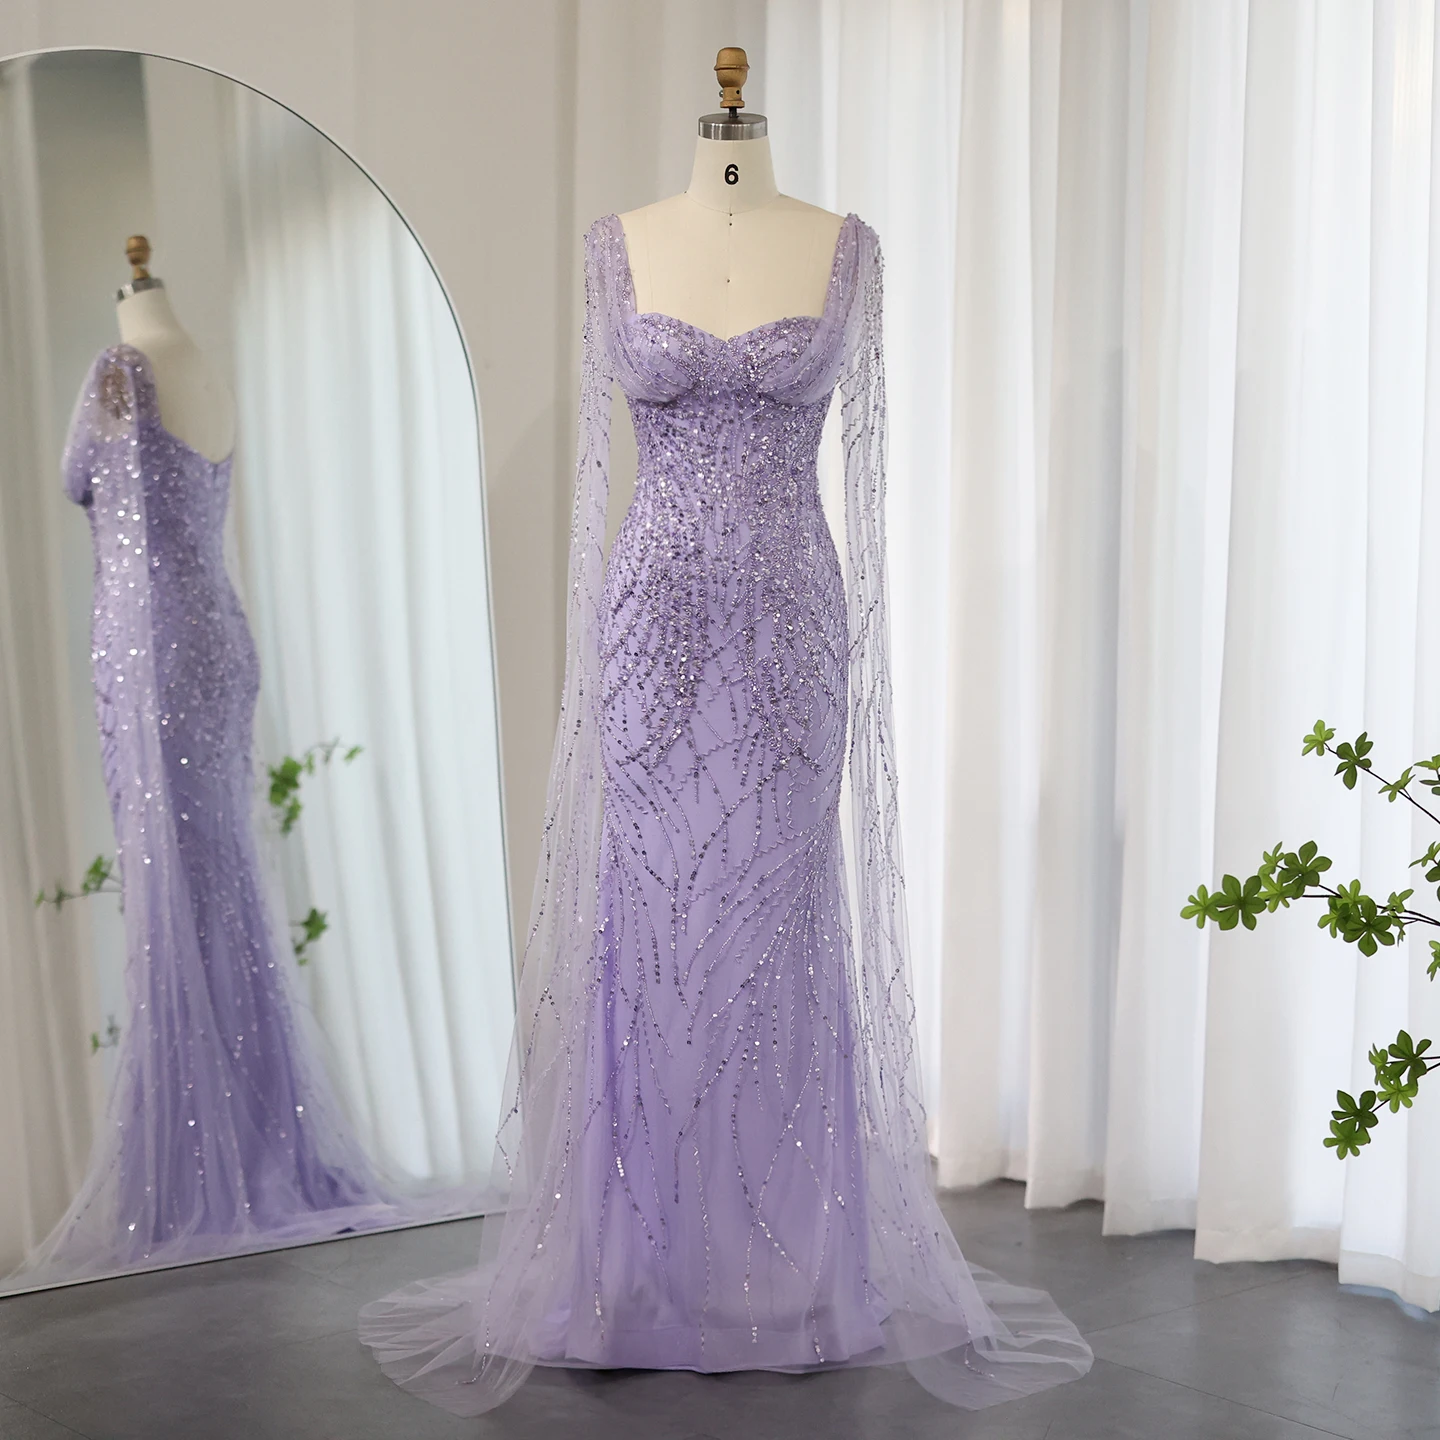 

Jancember Lilac Mermaid Luxury Dubai Evening Dresses with Cape Sleeves Elegant Arabic Women Wedding Formal Party Gowns SCZ211